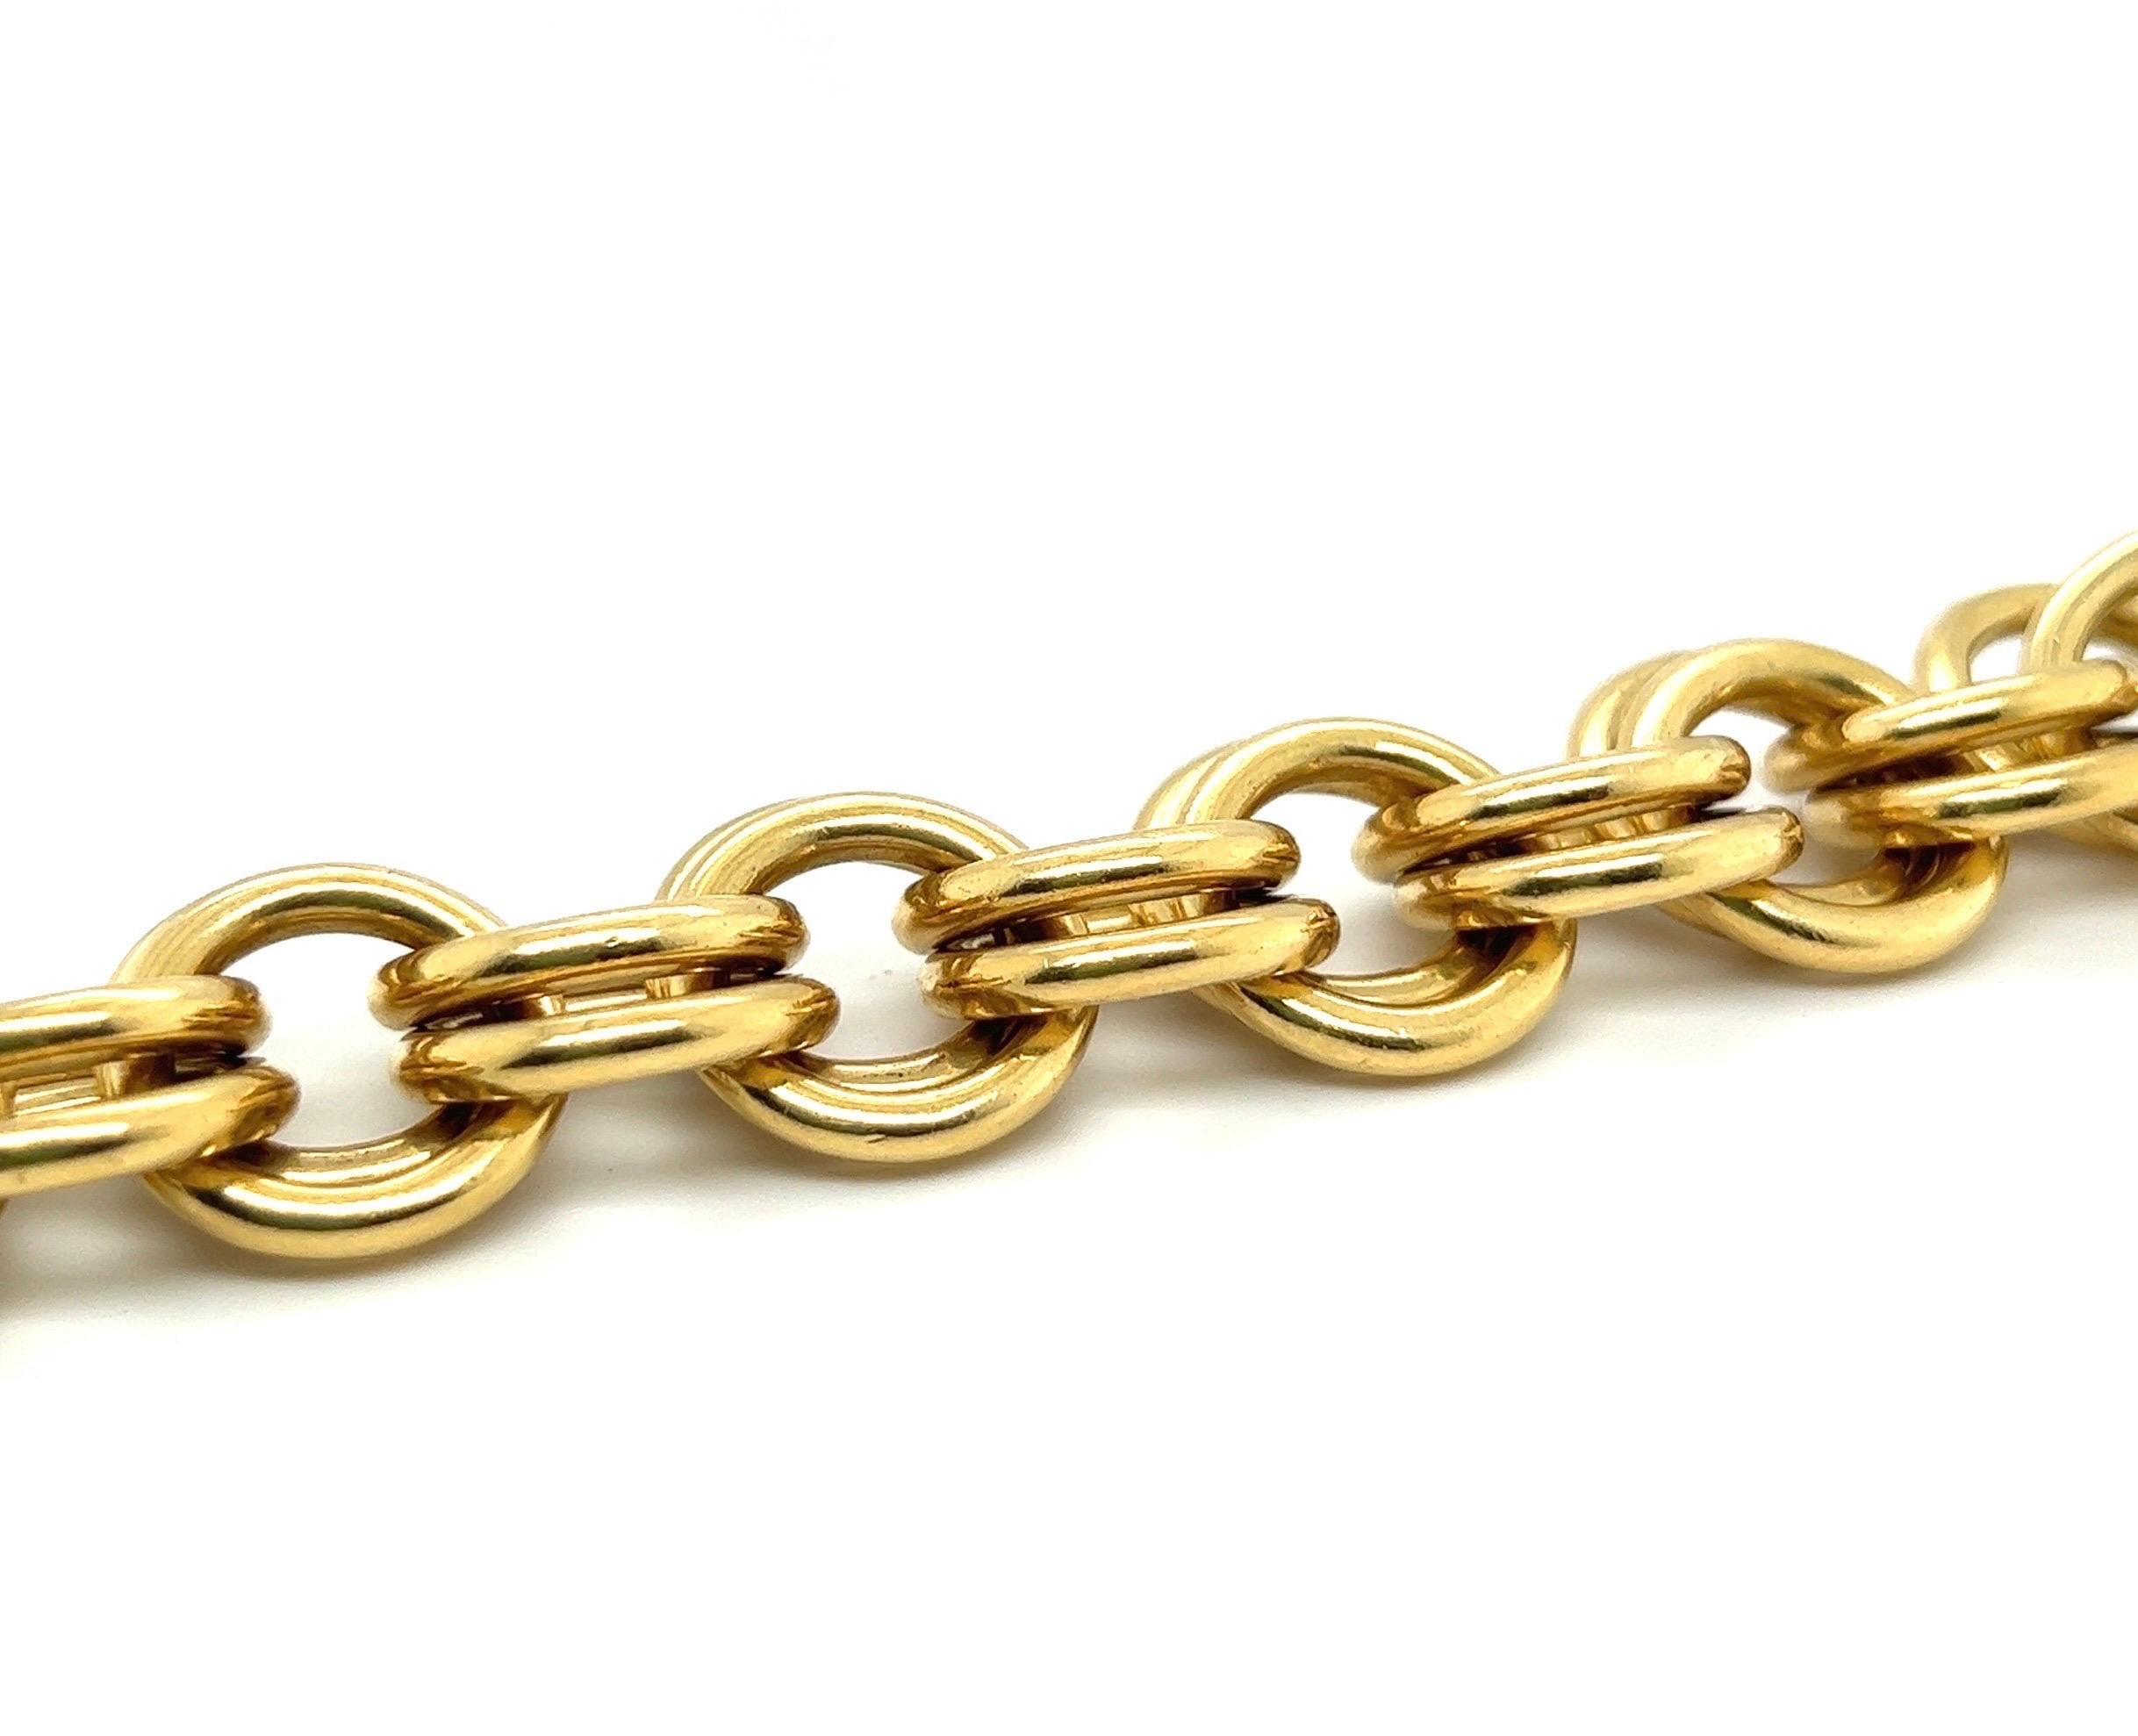 Stylish Tiffany & Co. Schlumberger Bull Swivel Bracelet in 18 karat yellow gold.

Crafted in 18 karat yellow gold and designed as 11 double ring links with a large lobster clasp. The bold gold links add dimension to this elegant chain